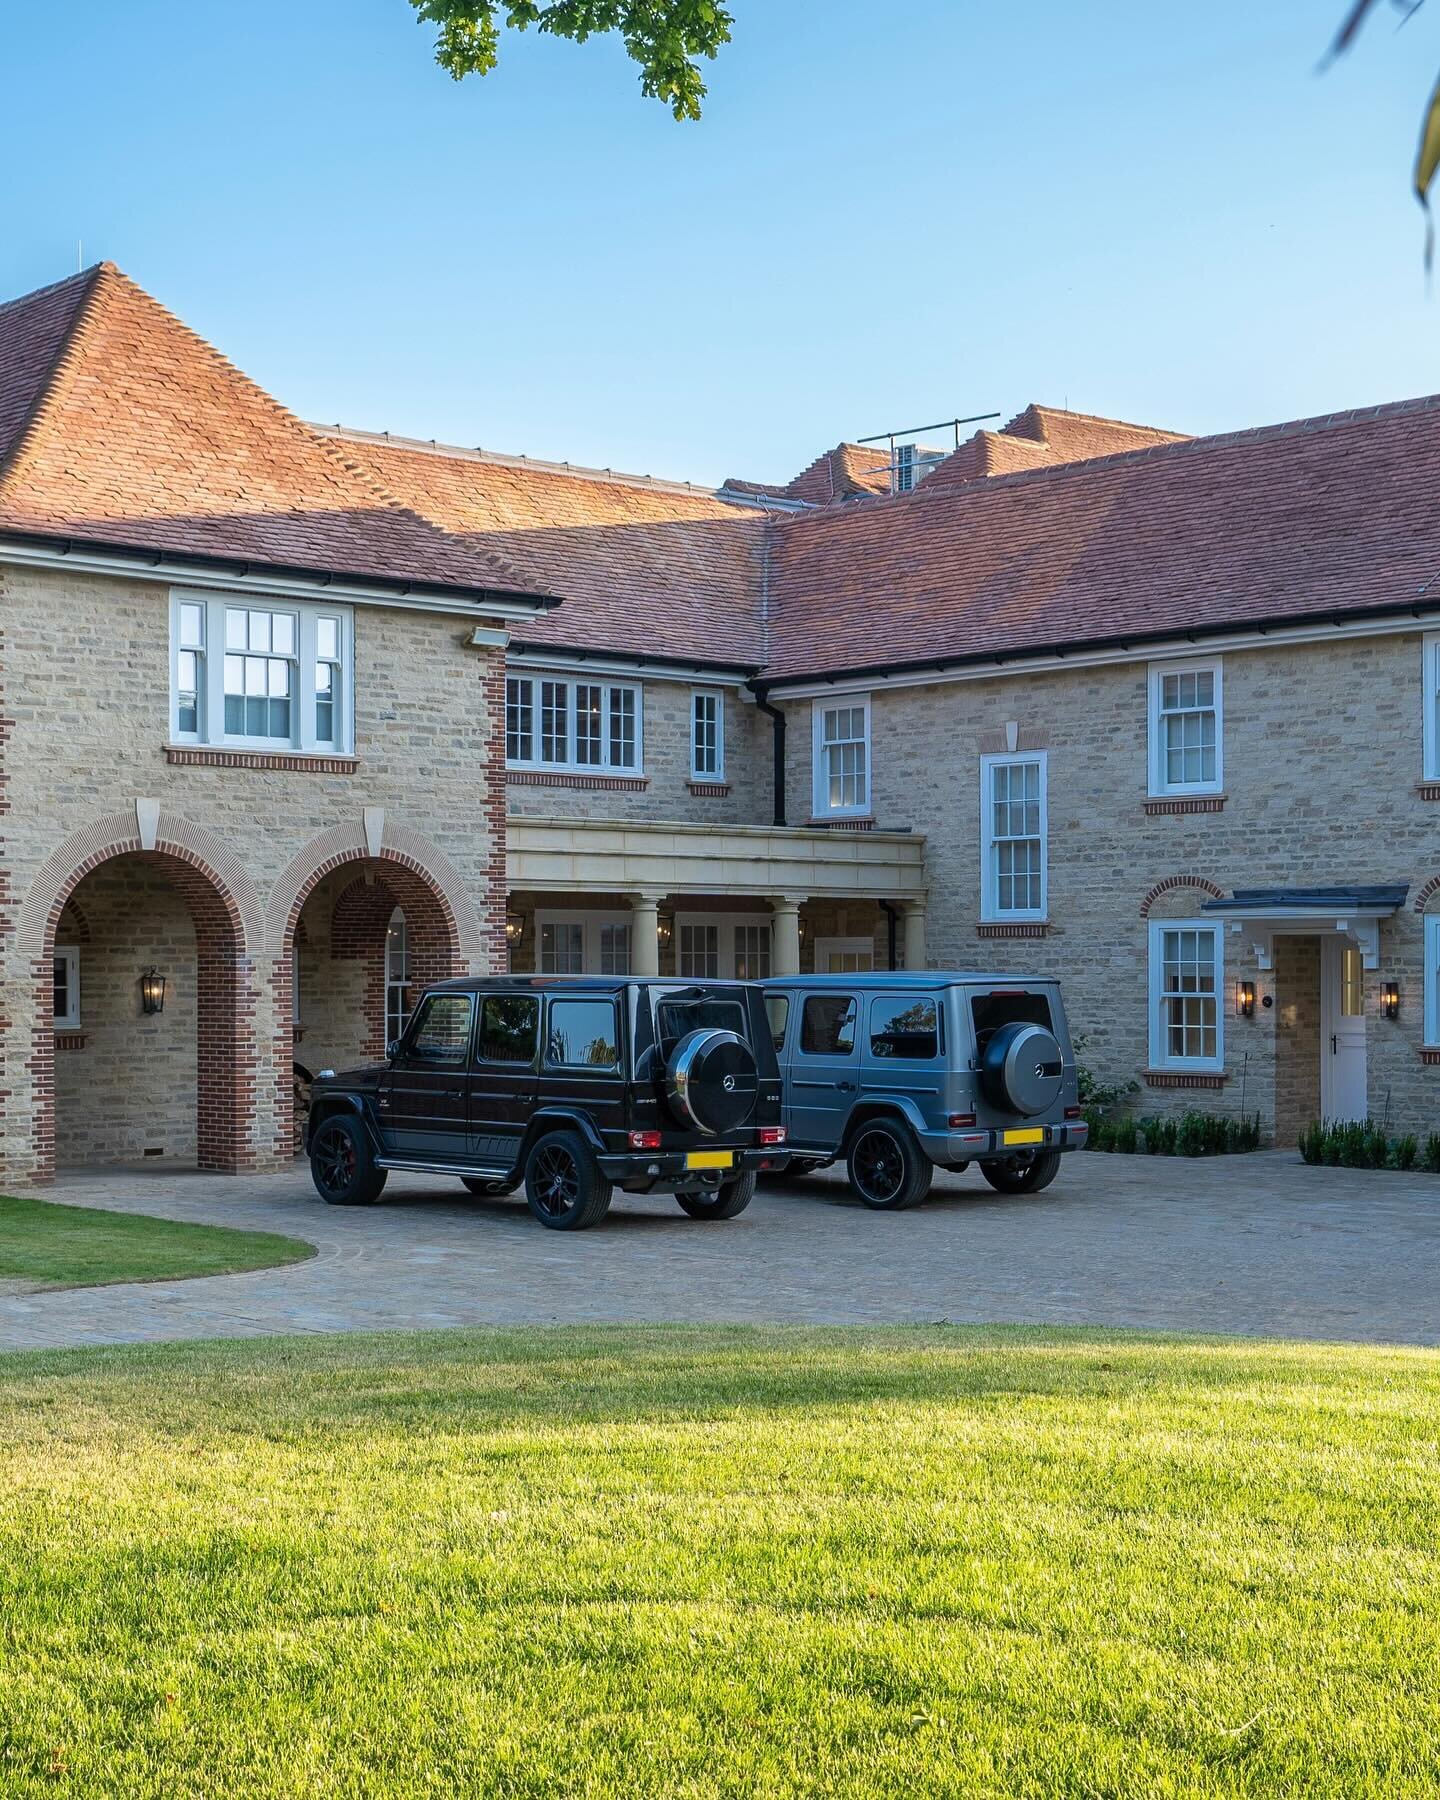 Some stunning shots from a project with @wearedreamweaver last summer at this incredible property 🏡 #luxury #property #home #photography #video #contentmarketing